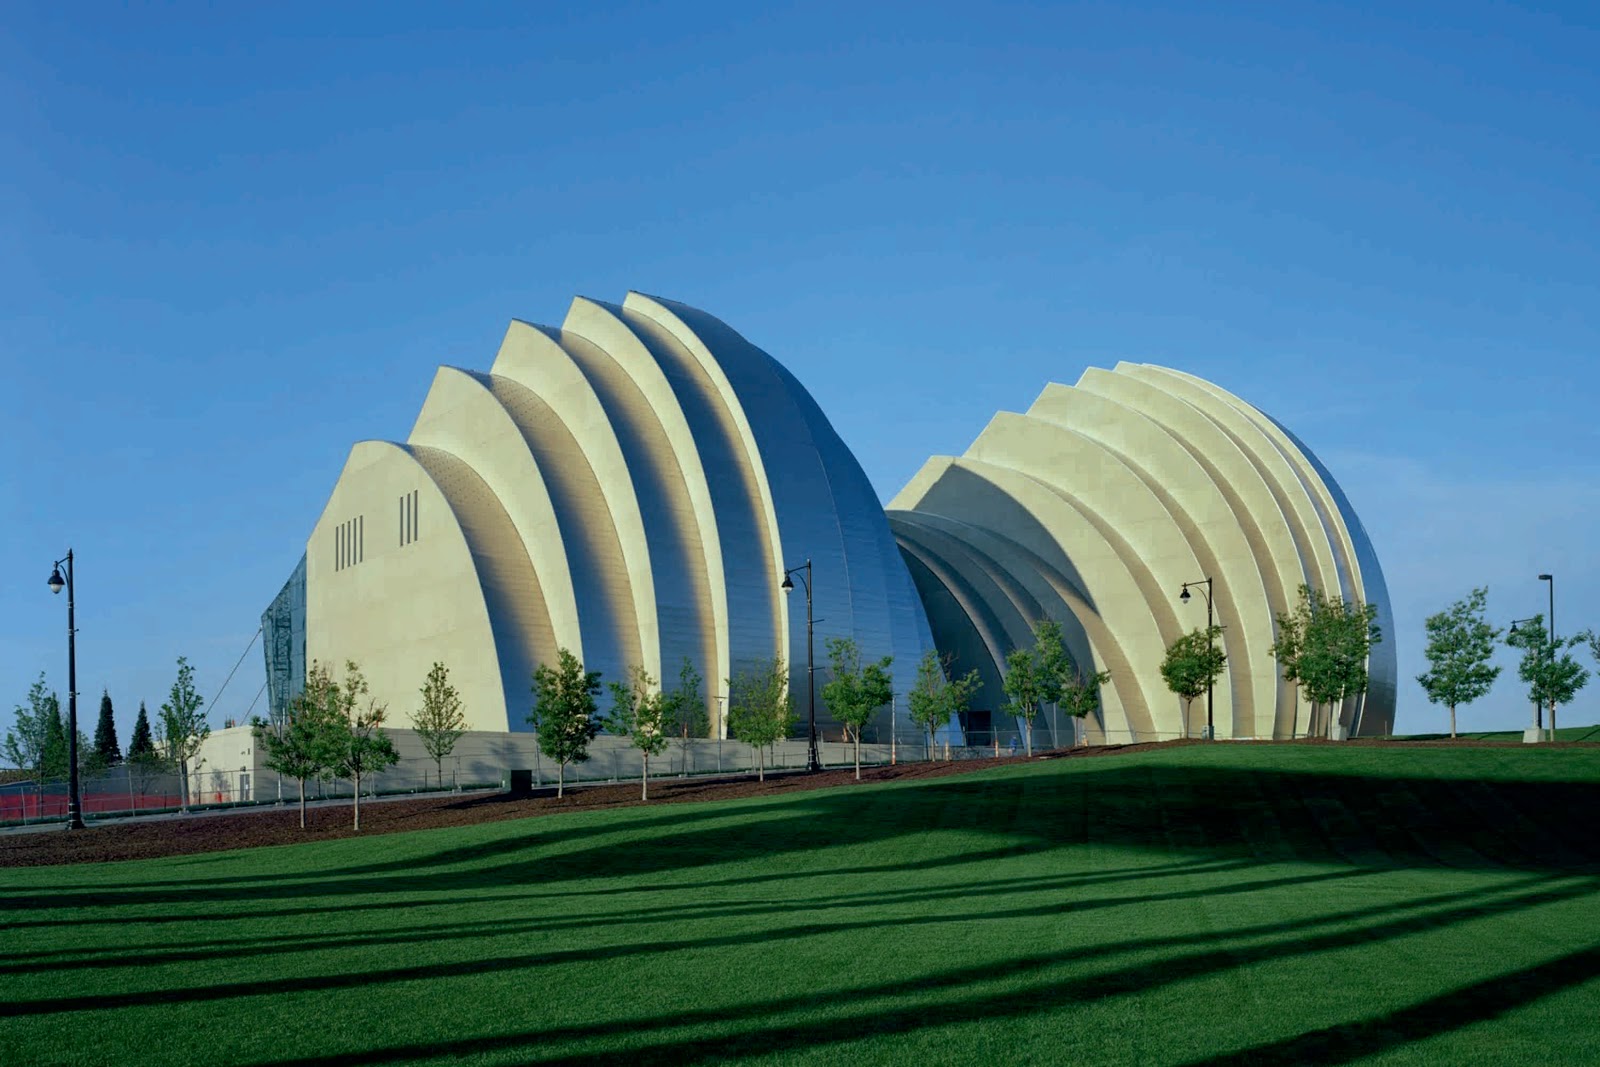 KAUFFMAN CENTER FOR THE PERFORMING ARTS BY MOSHE SAFDIE | A As Architecture